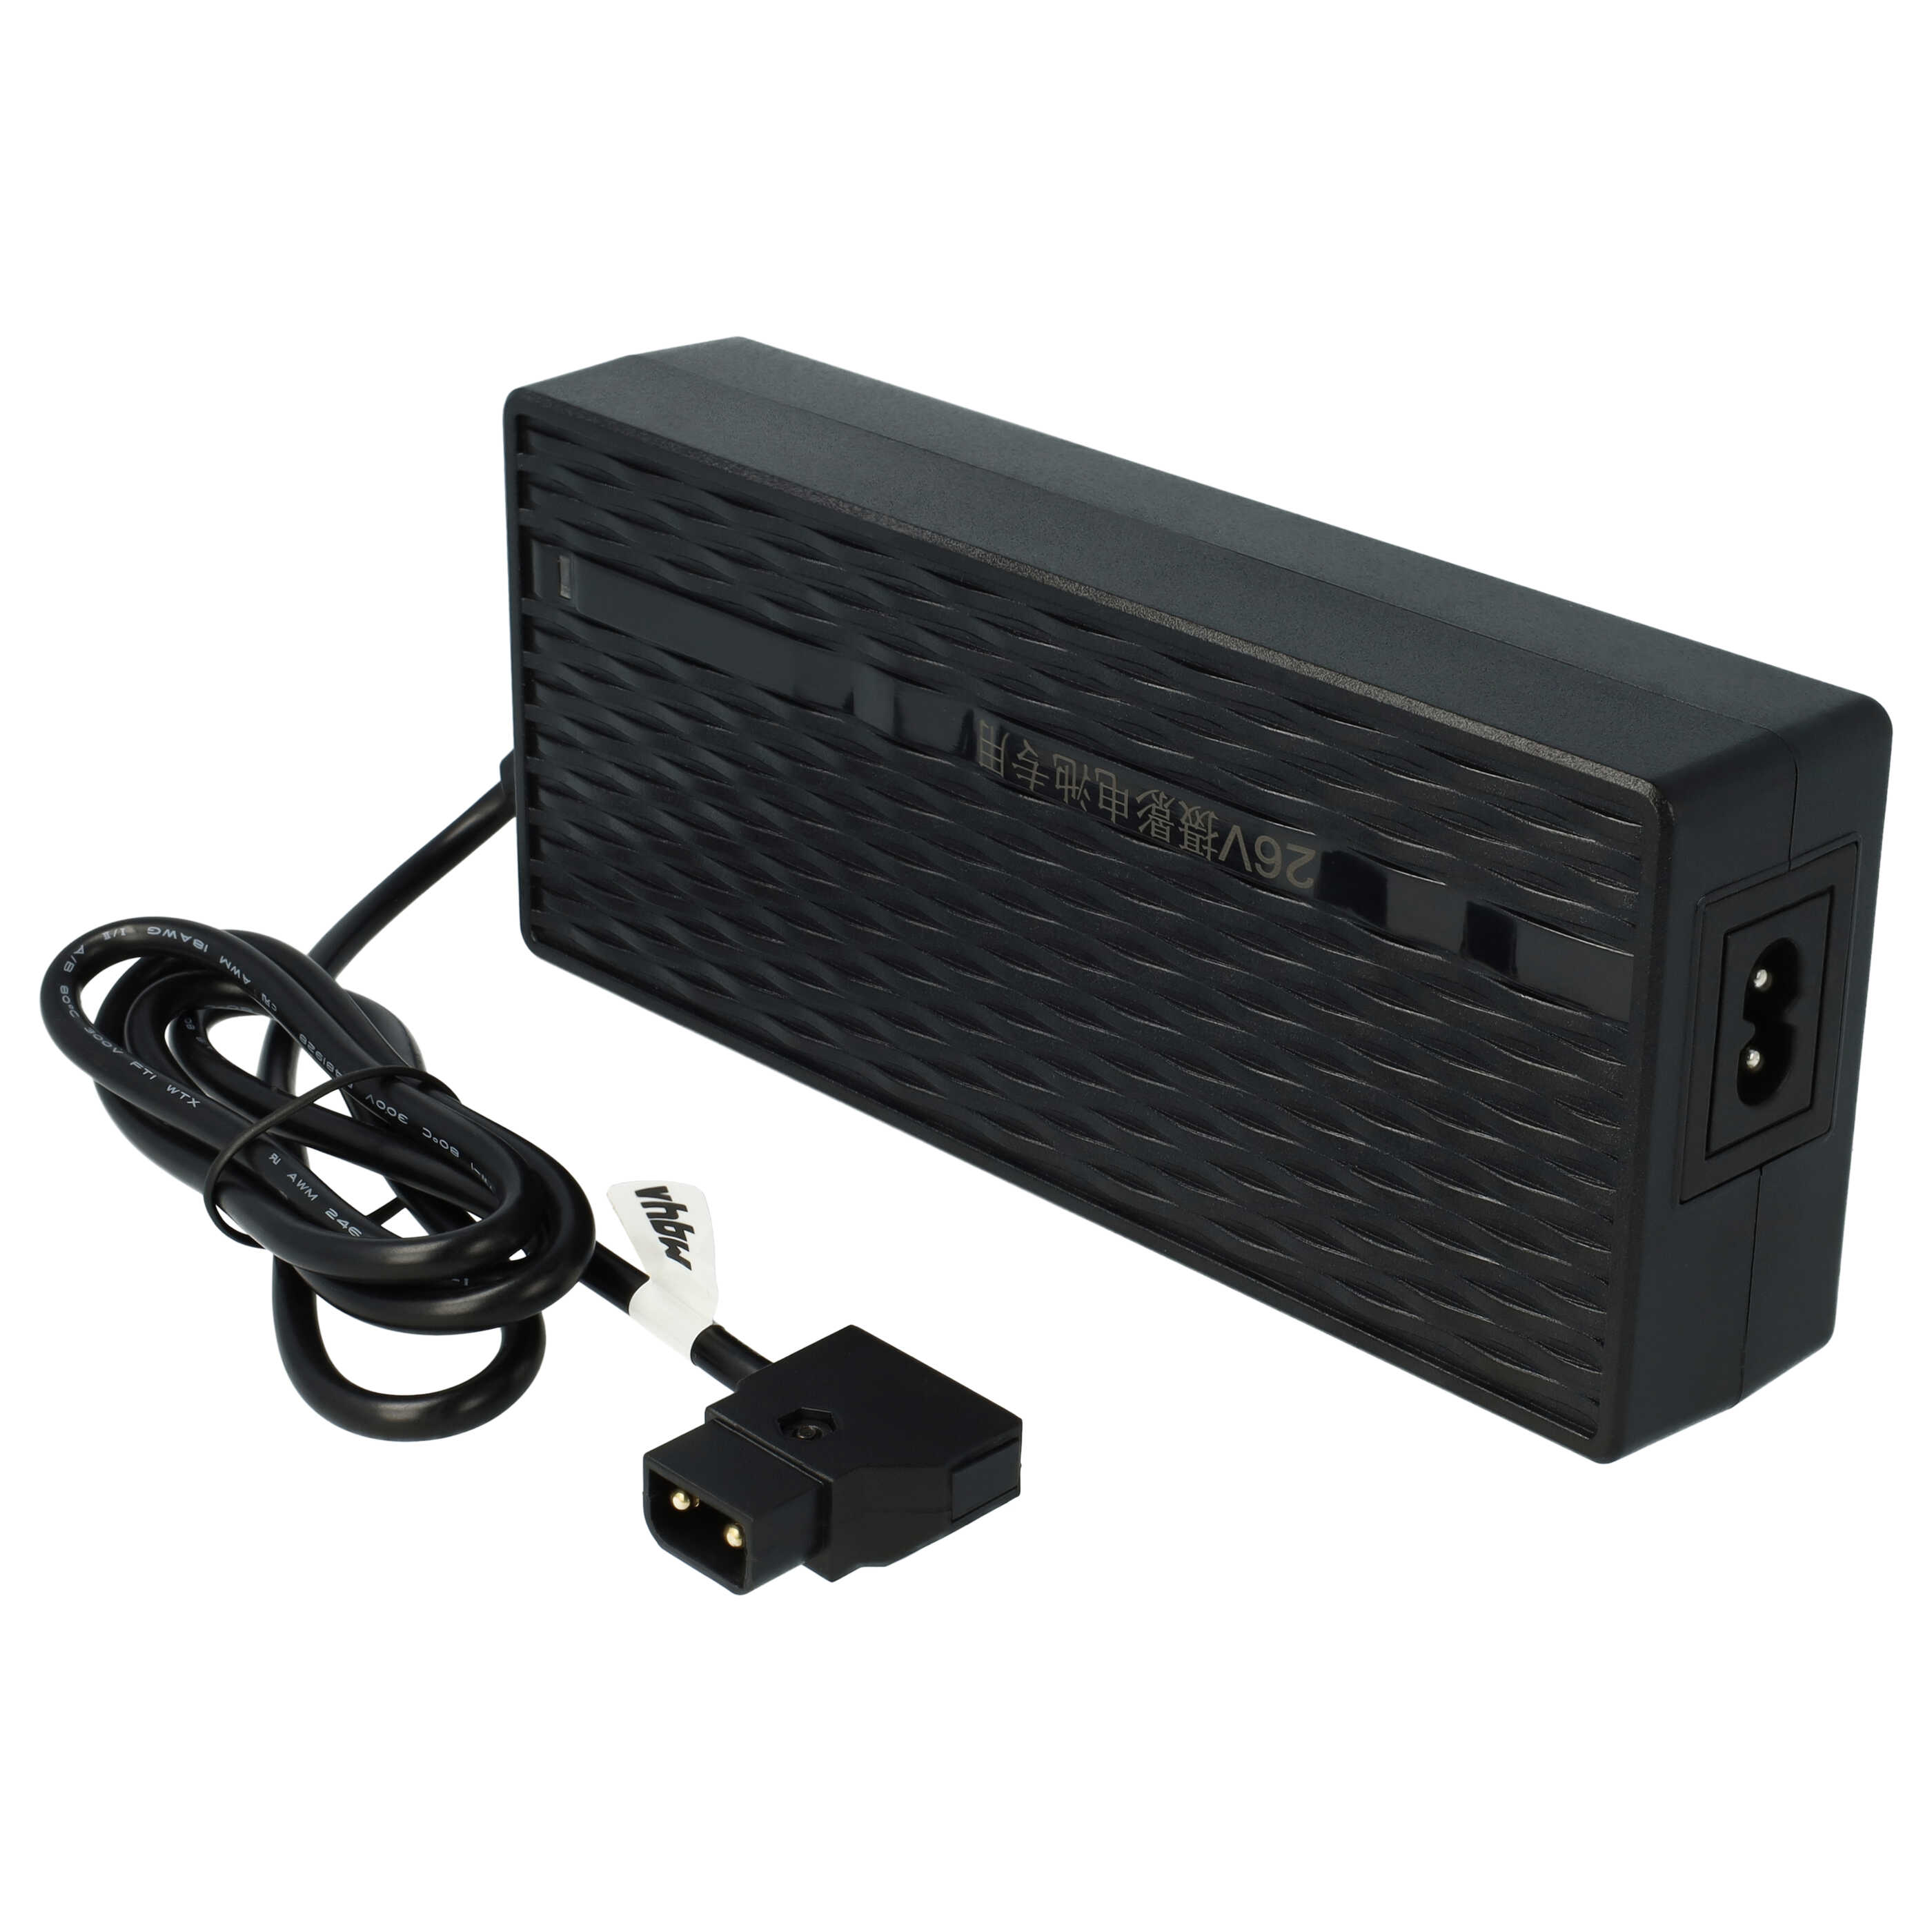 Power Supply suitable for BP-150W Camera, 29.4 V 4.5 A